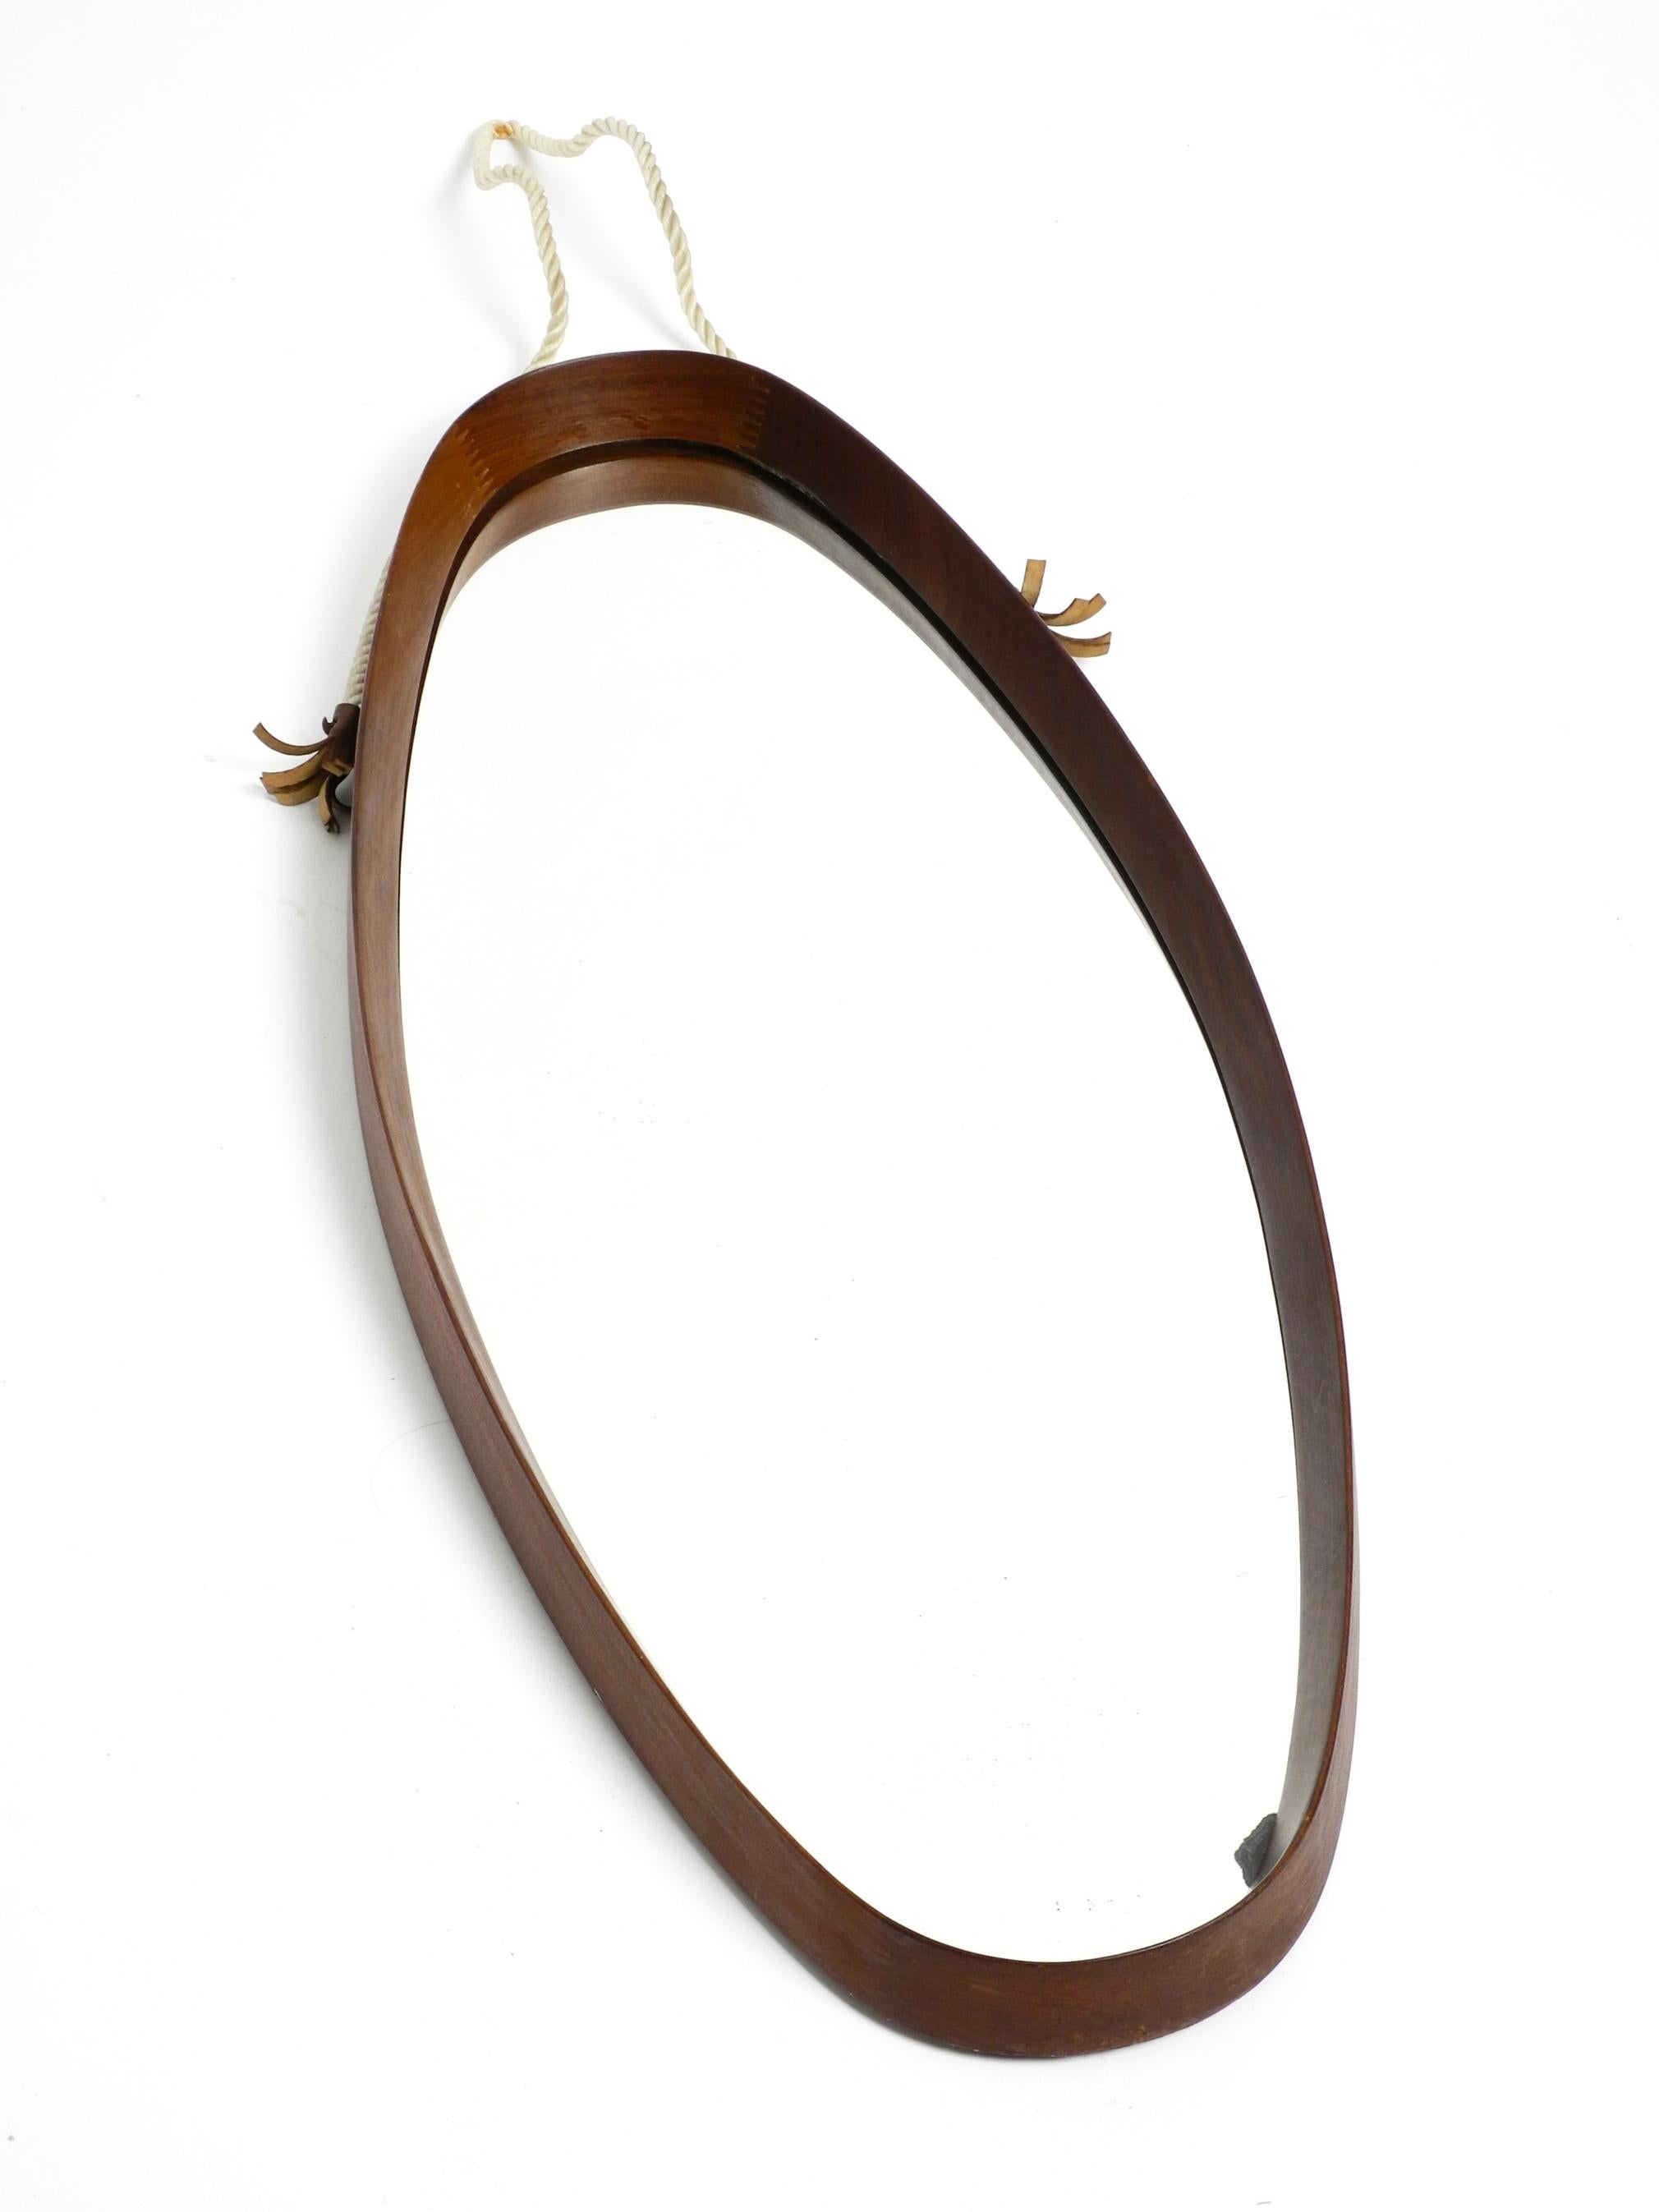 Original 1960's beautiful large oval wall mirror with a teak frame. Made in Italy.
Very high-quality workmanship in a minimalist Italian design.
The original thick nylon hanging rope is undamaged and firm.
By hanging it, the nylon rope gets straight